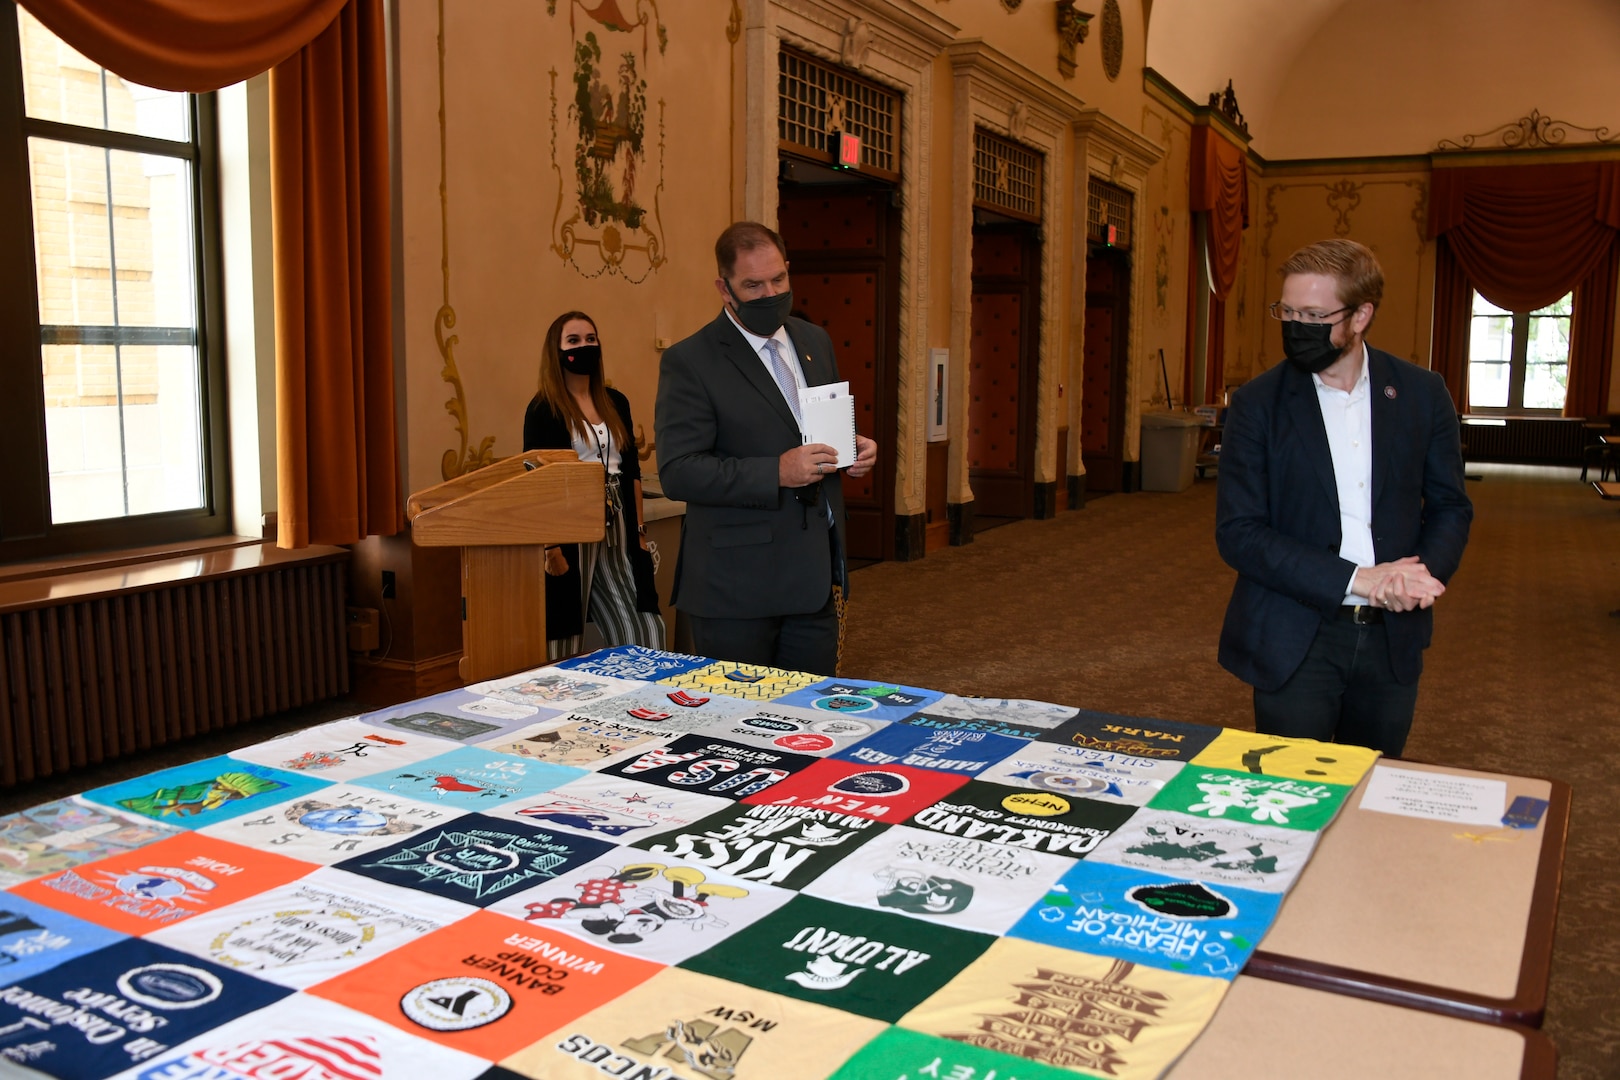 Onlookers examine a quilt that is part of an art display.